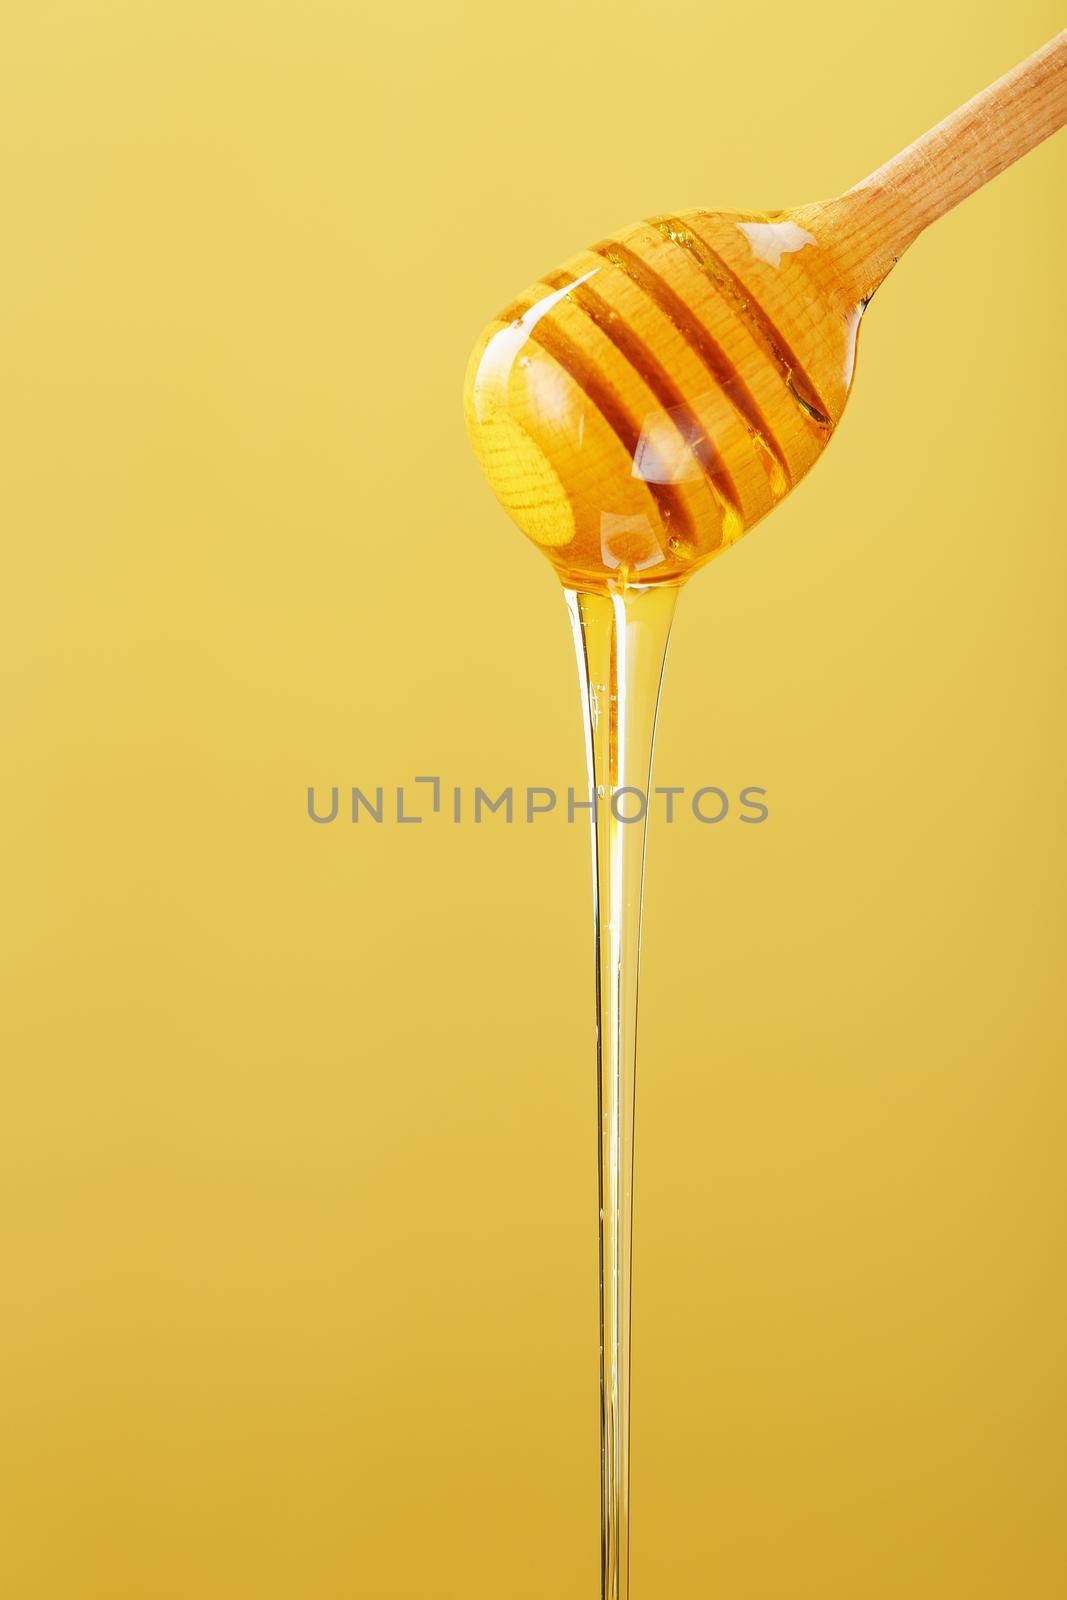 Golden honey trickles from a wooden honey dipper on a yellow background by AlexGrec